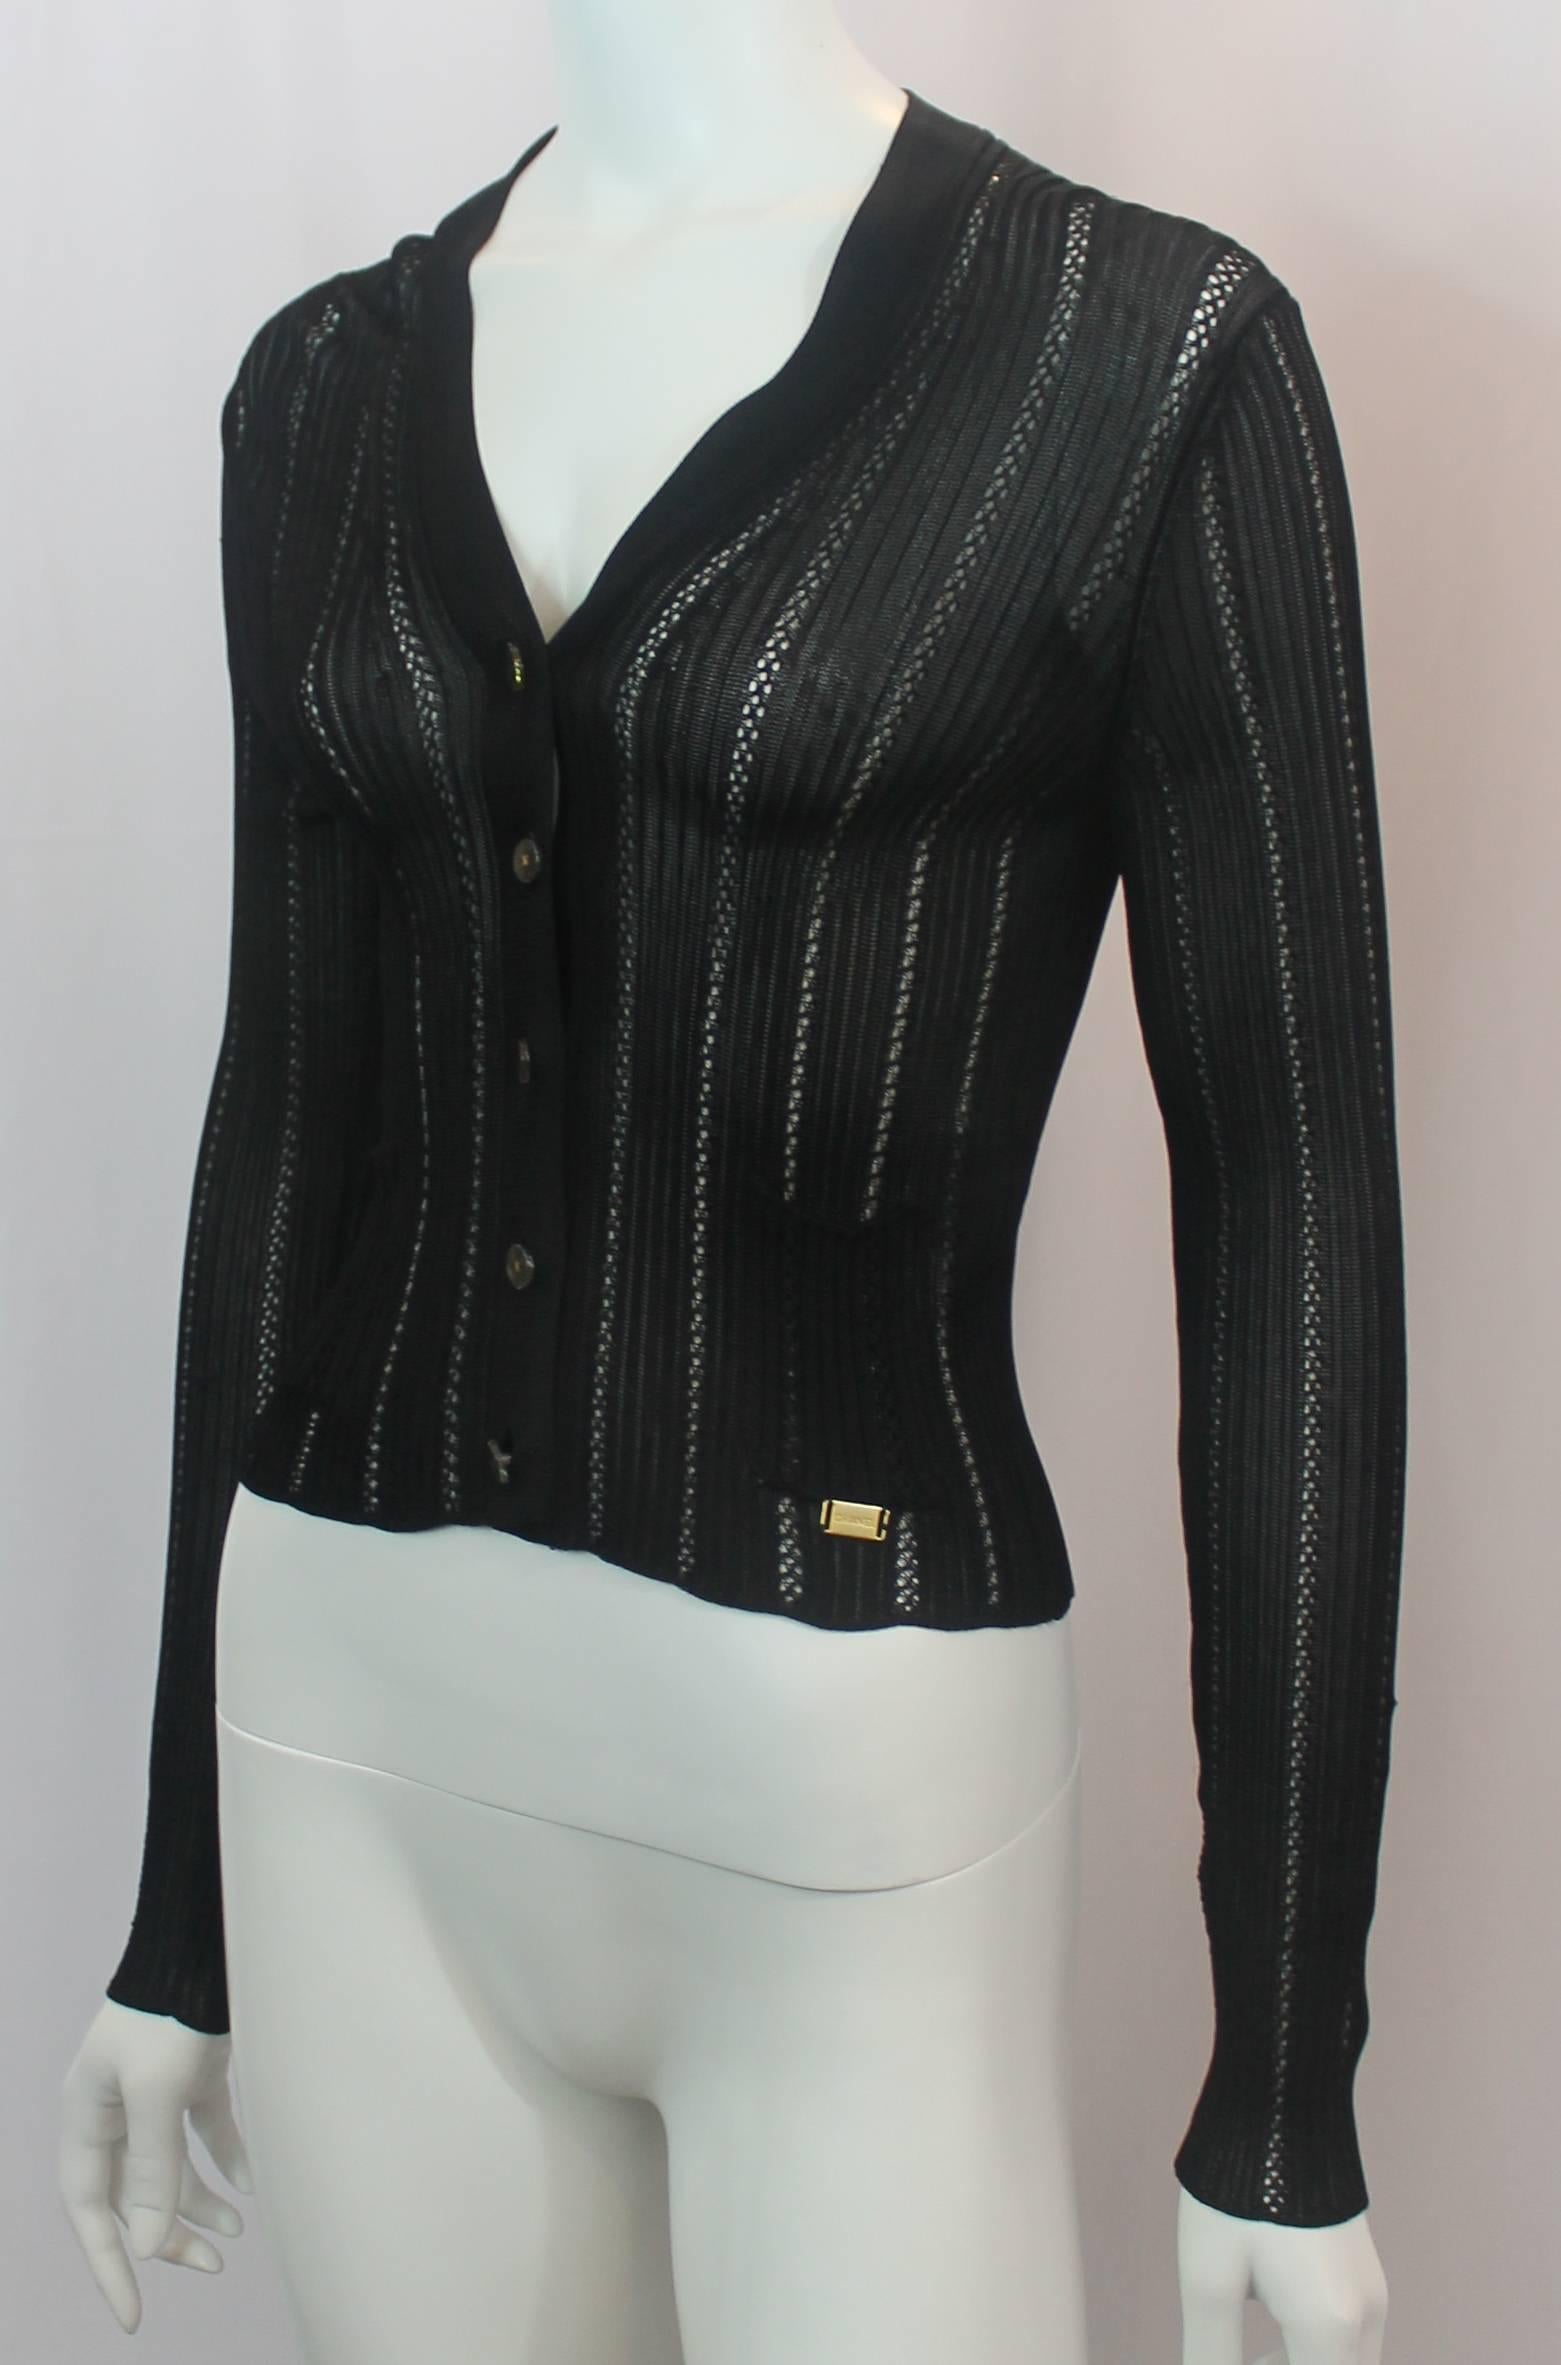 Chanel Black Silk Knit Long Sleeve V-Neck Light Cardigan - 36 - 1990's. This vintage silk knit cardigan is lightweight, long sleeve and has a v-neckline. There are 2 small front pockets and a gold Chanel logo plaque. The buttons are clear Lucite